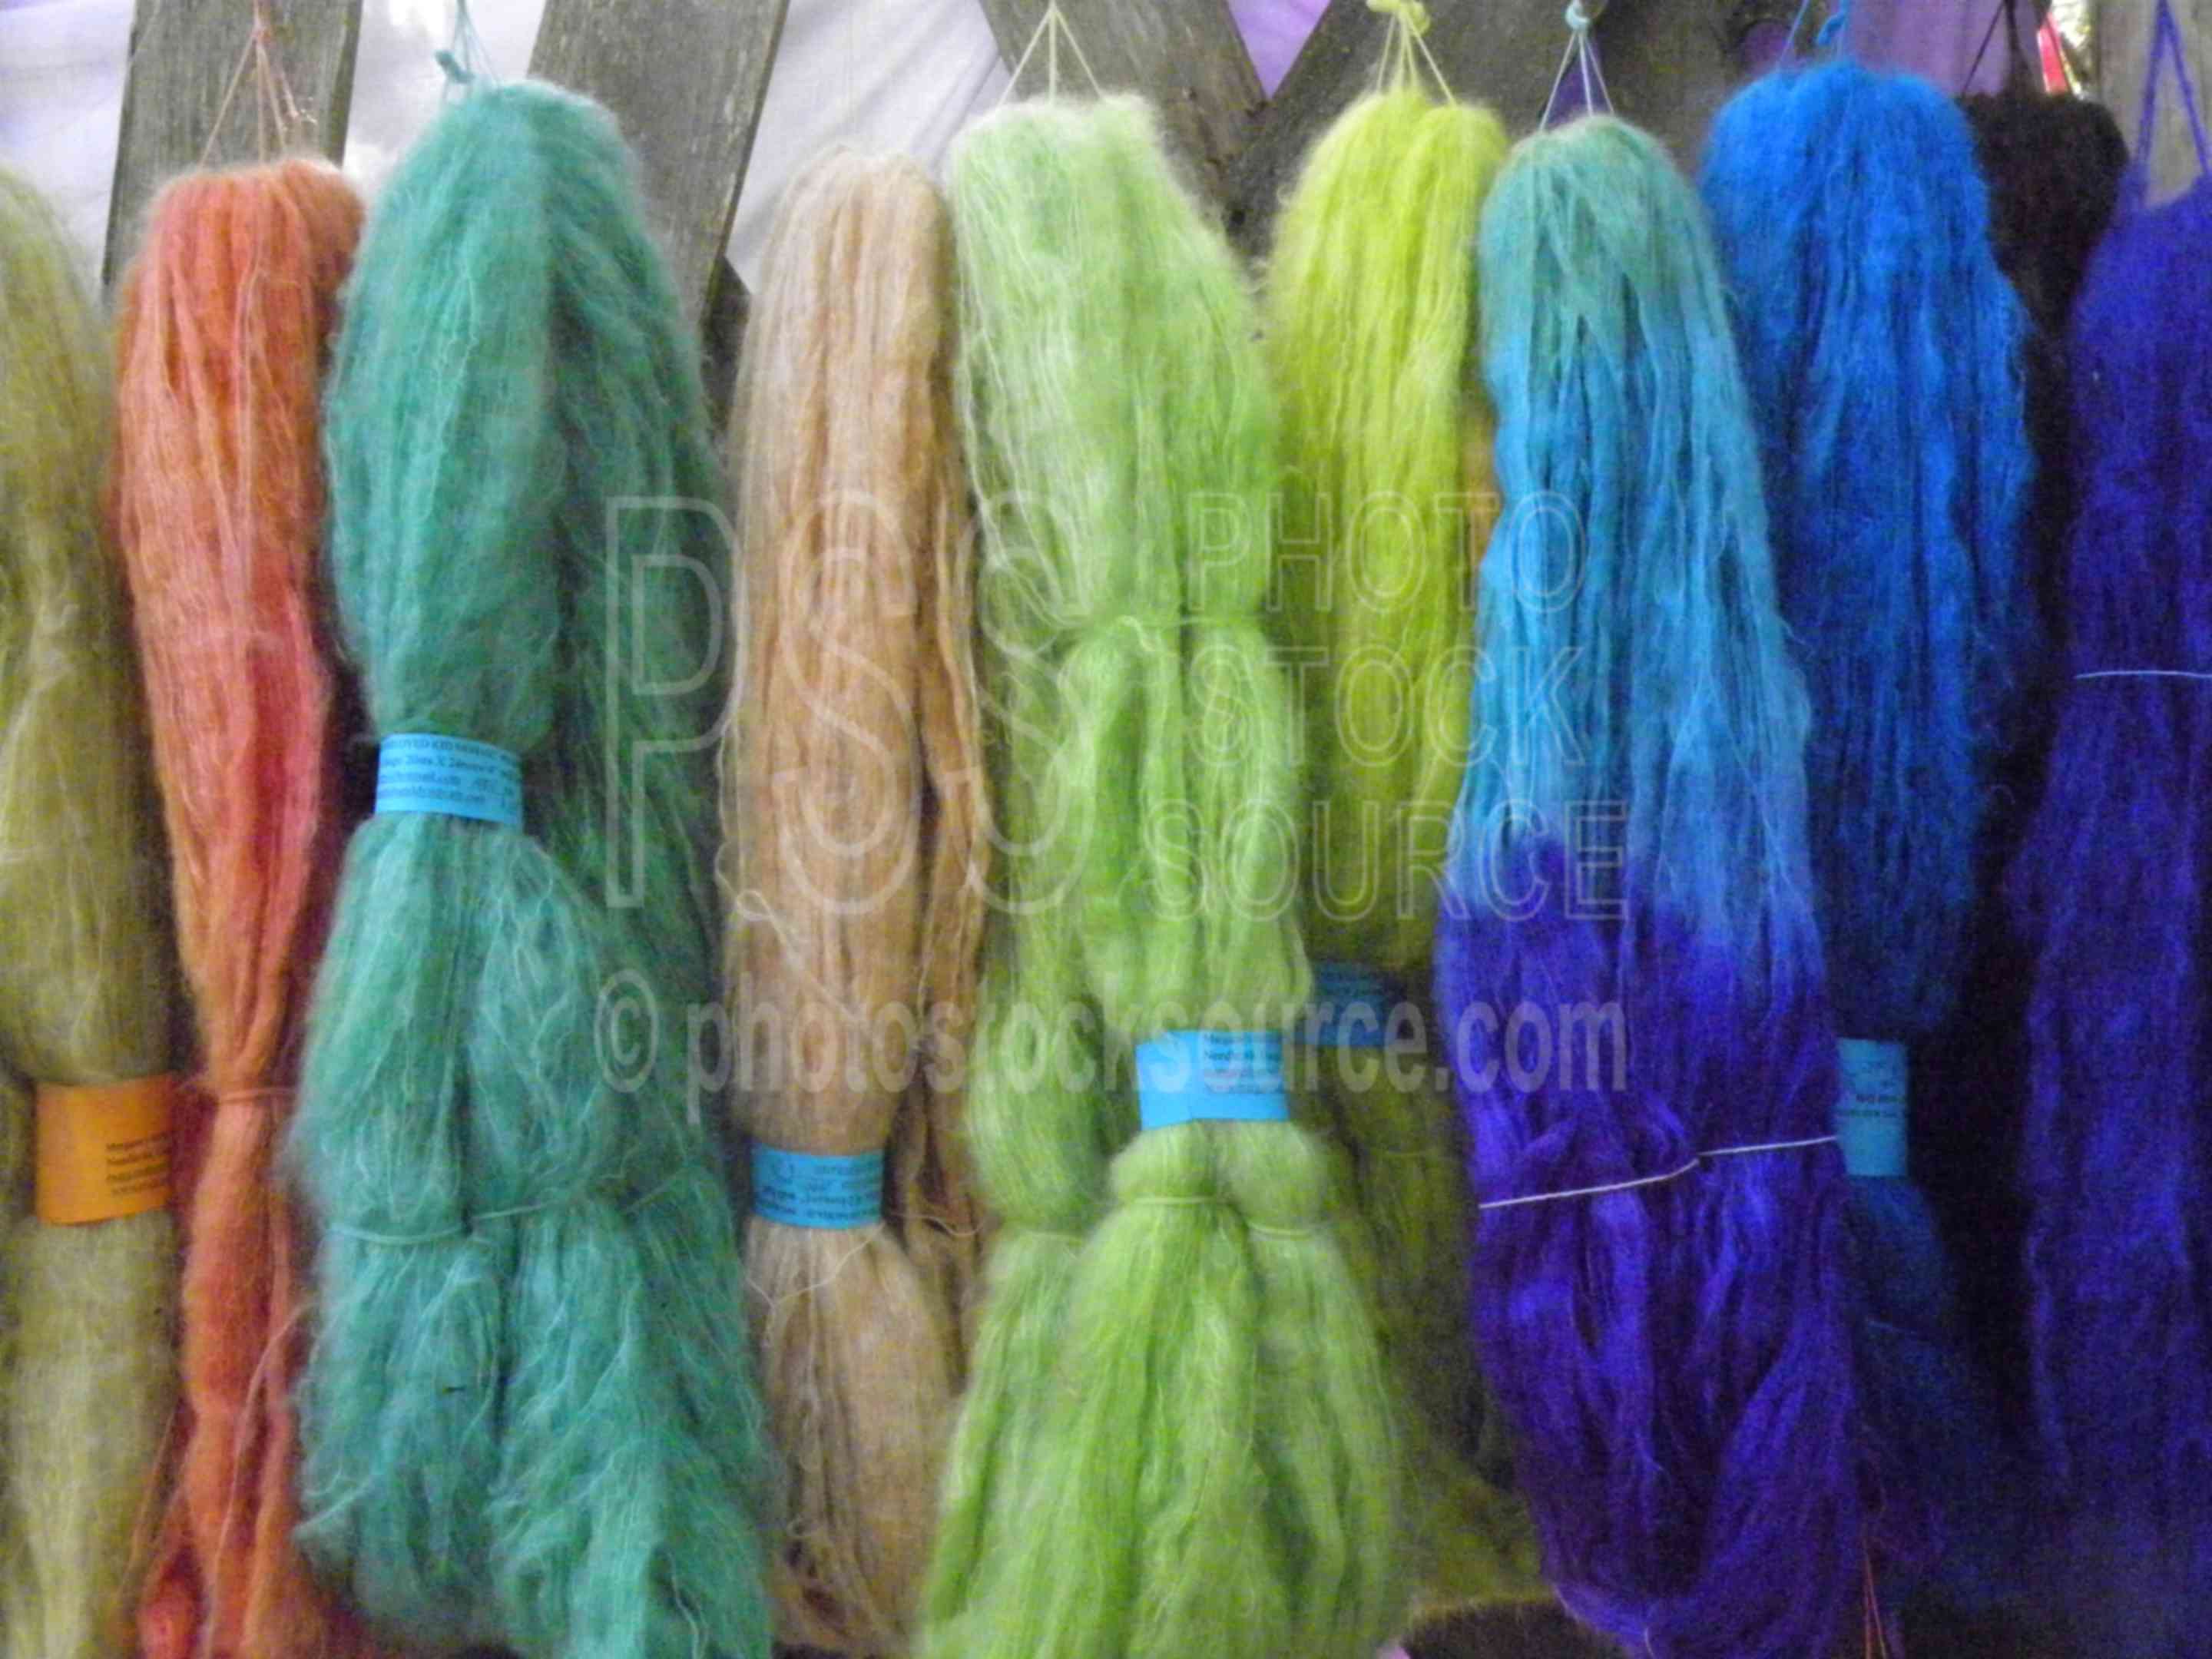 Dyed Wool,color,fair,faire,festival,gathering,hippy,hippies,celebration,dyed wool